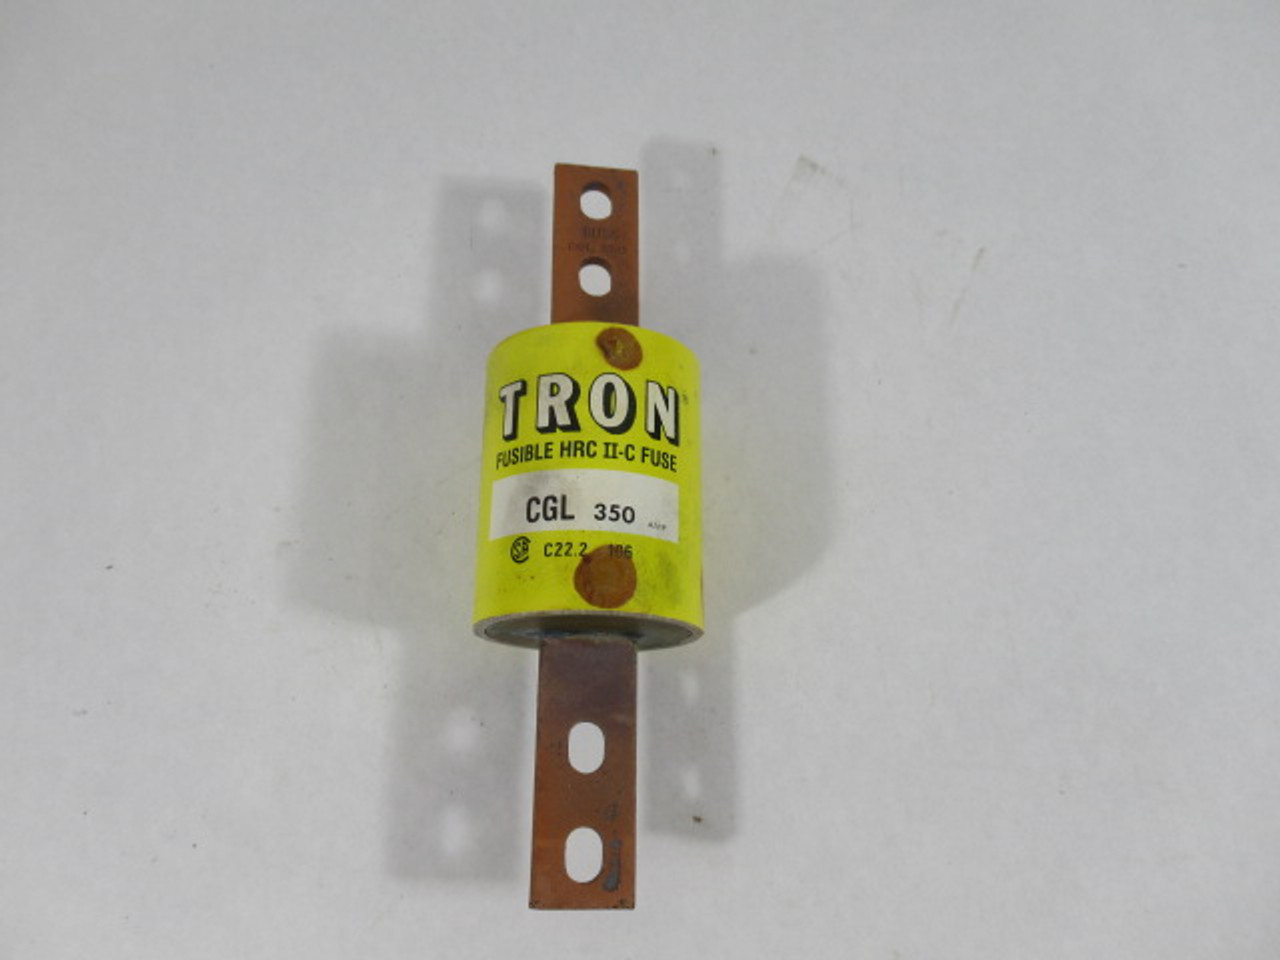 Tron CGL-350 Fusible HRC II-C Fuse 600VAC *Damaged and Stained Box* ! NEW !